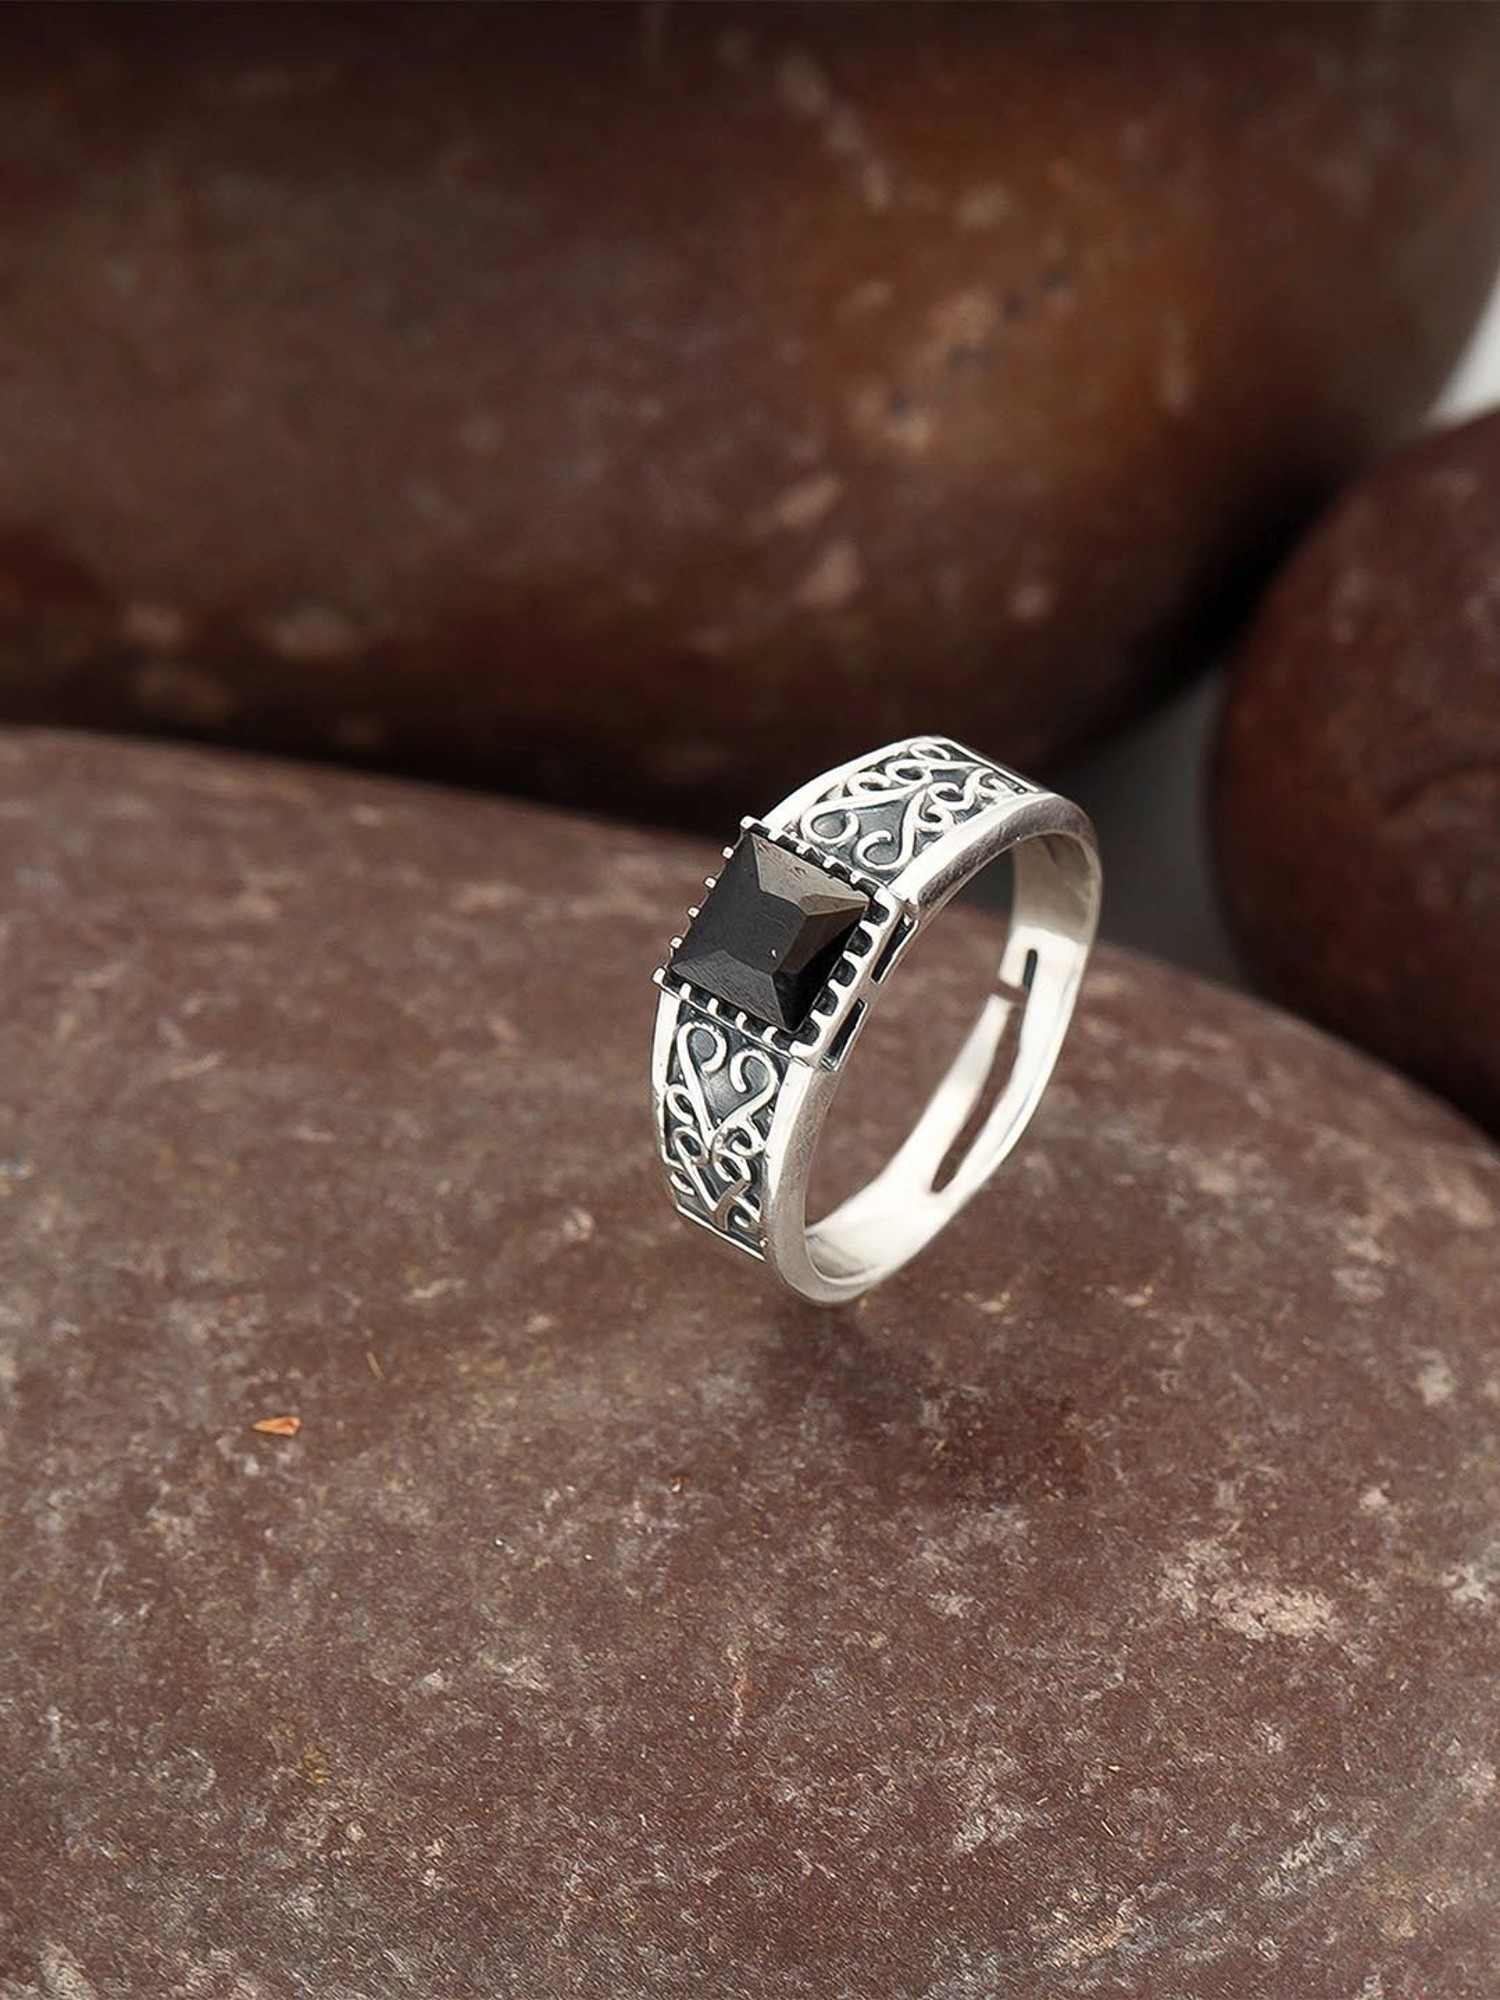 Silver Men Square Black Onyx Gemstone Ring Solid 925 Sterling Silver »  Anitolia